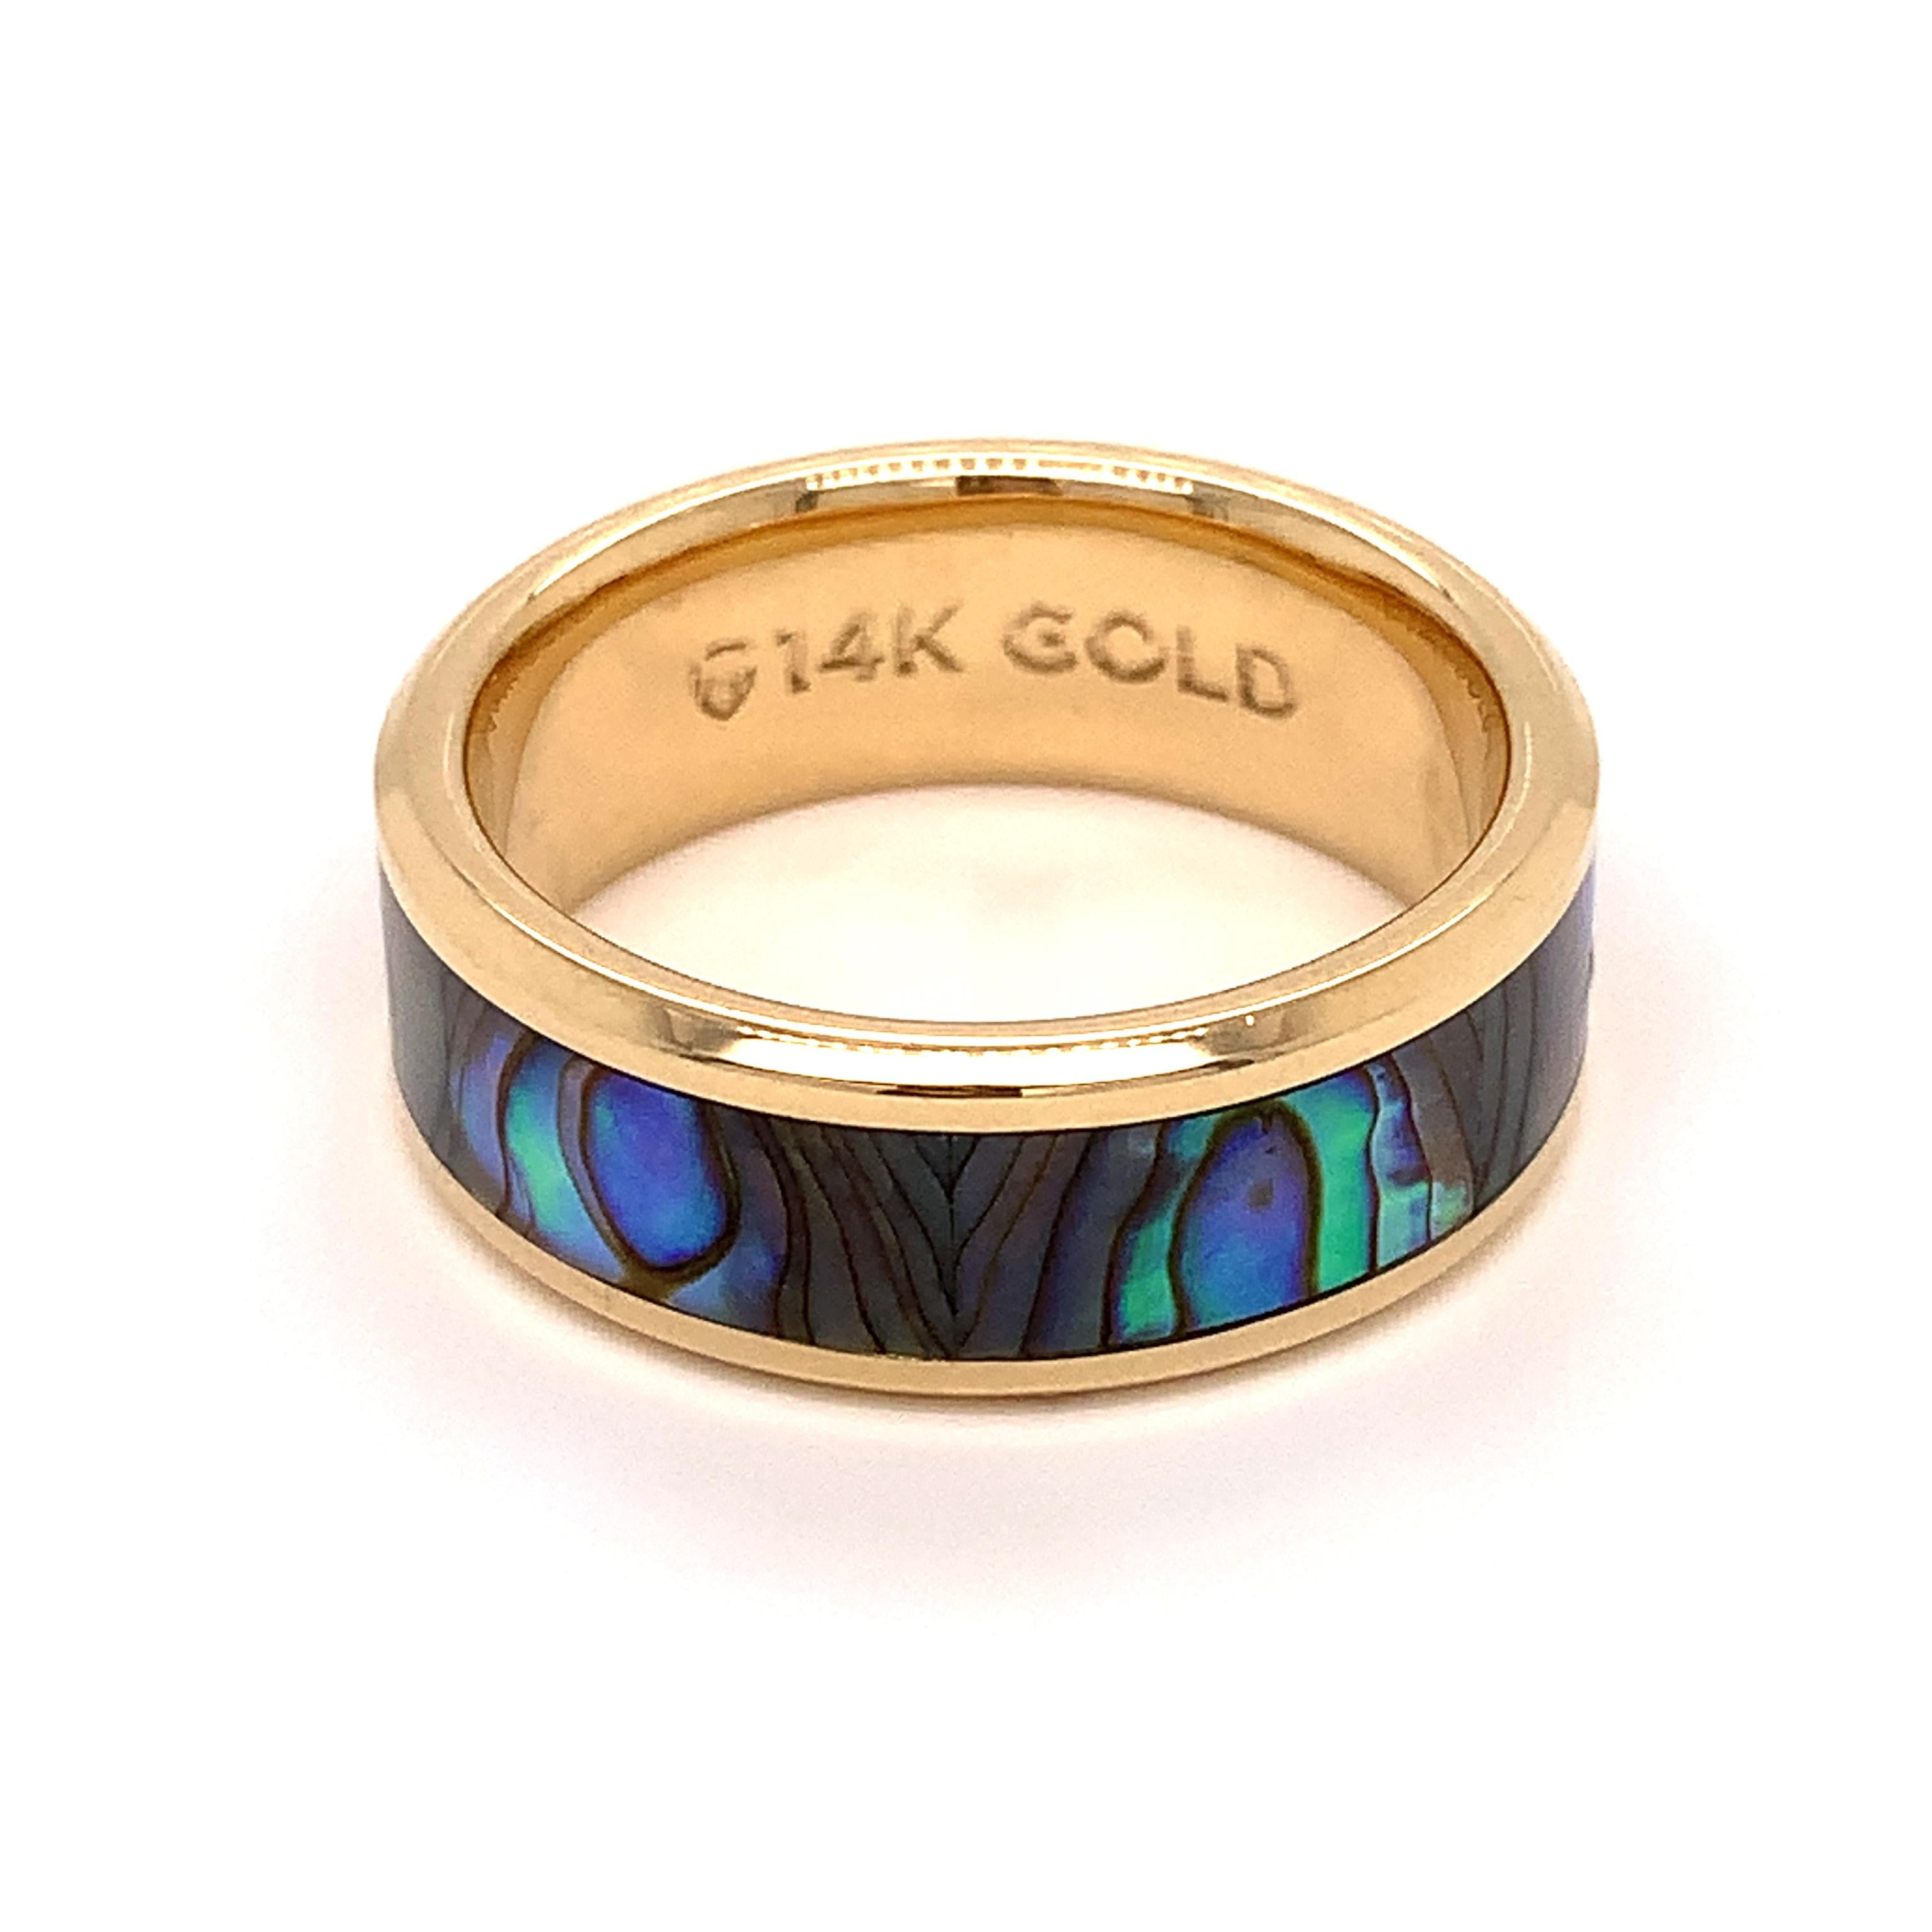 This 14K Yellow Gold men's ring by Thorsten contains a colorful Mother of Pearl inlay. This ring is a unique alternative to a traditional wedding band. The band is 8mm wide with polished edges for a more clean and finished look.

This is an estate